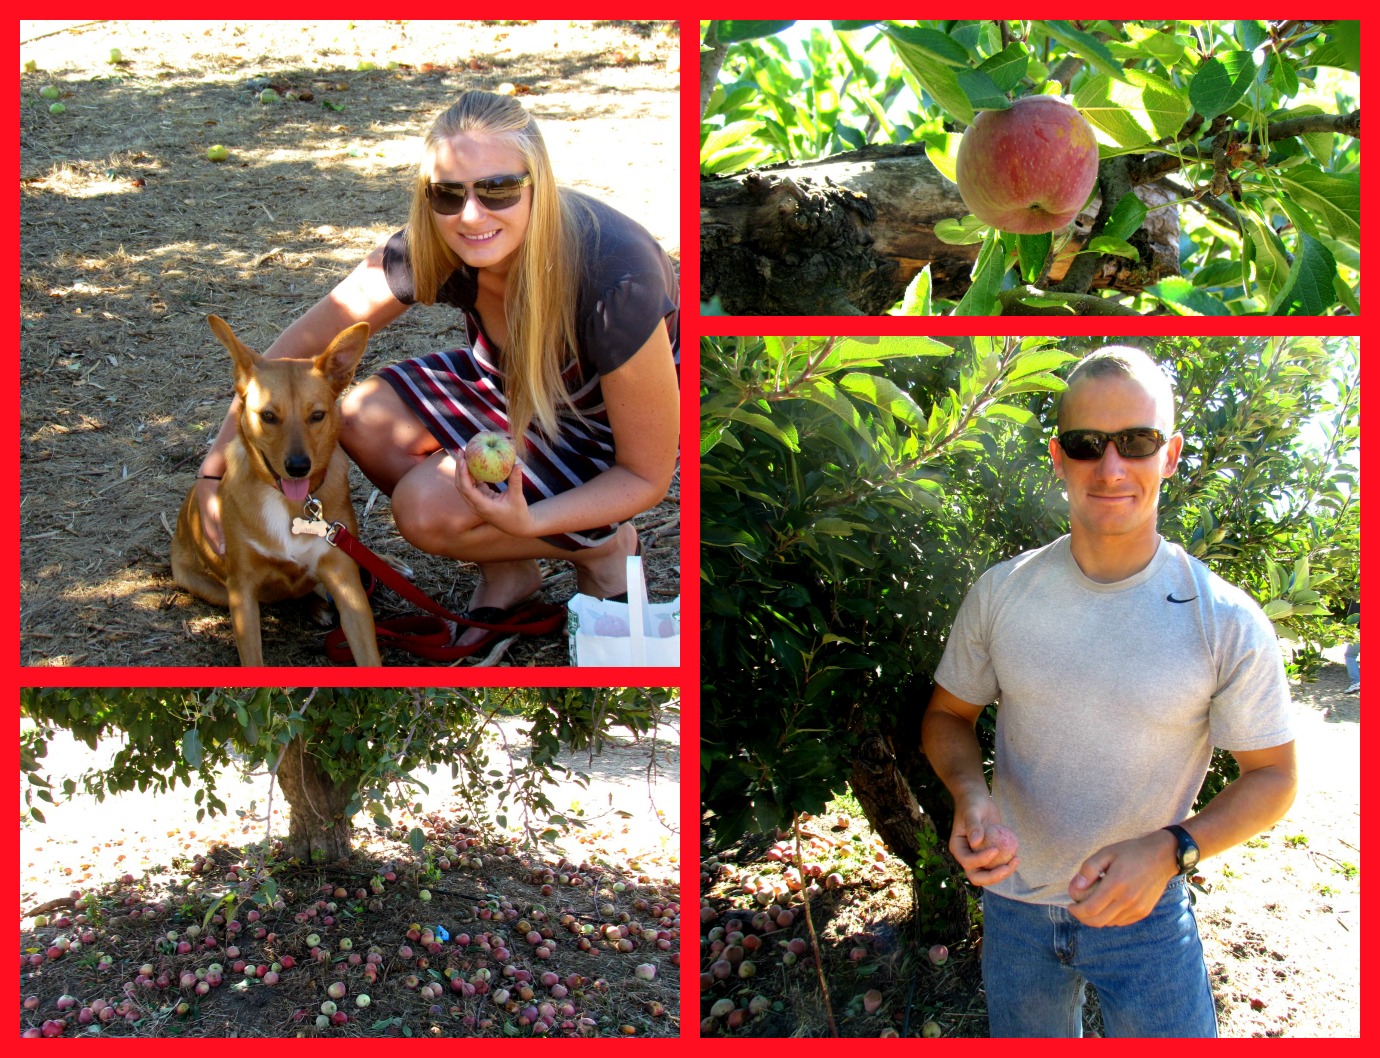 Scenes from apple picking in 2012